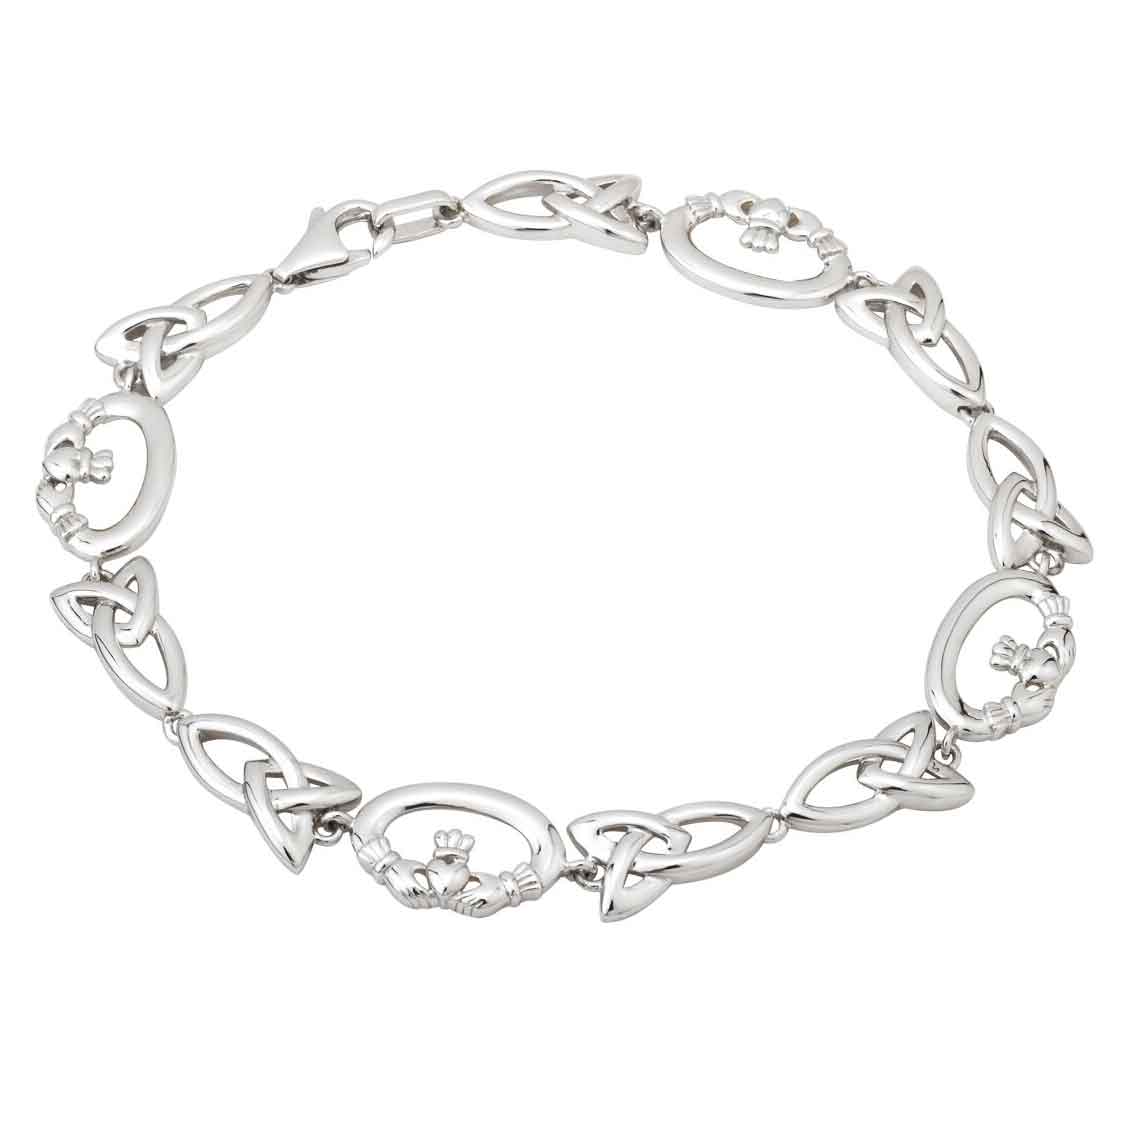 Product image for Irish Bracelet - Sterling Silver Claddagh and Trinity Knot Celtic Bracelet